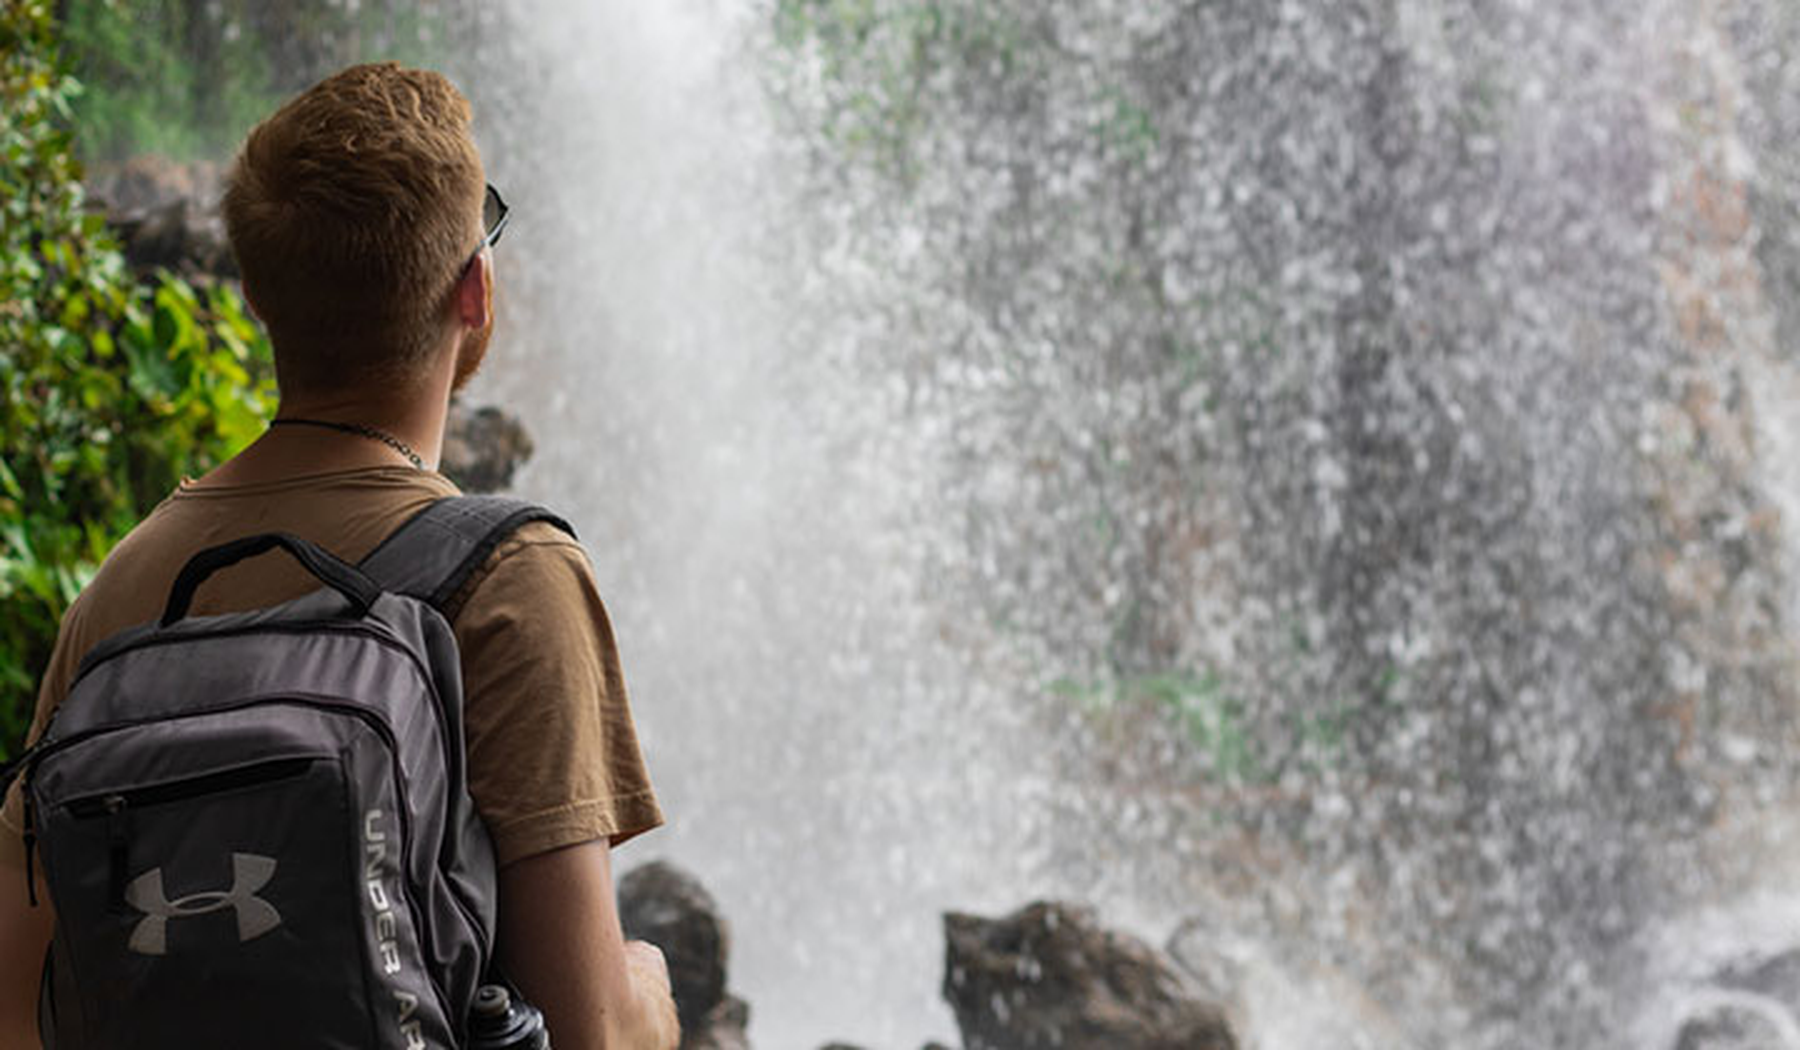 Young man in front of a waterfall with an Under Armour backpack